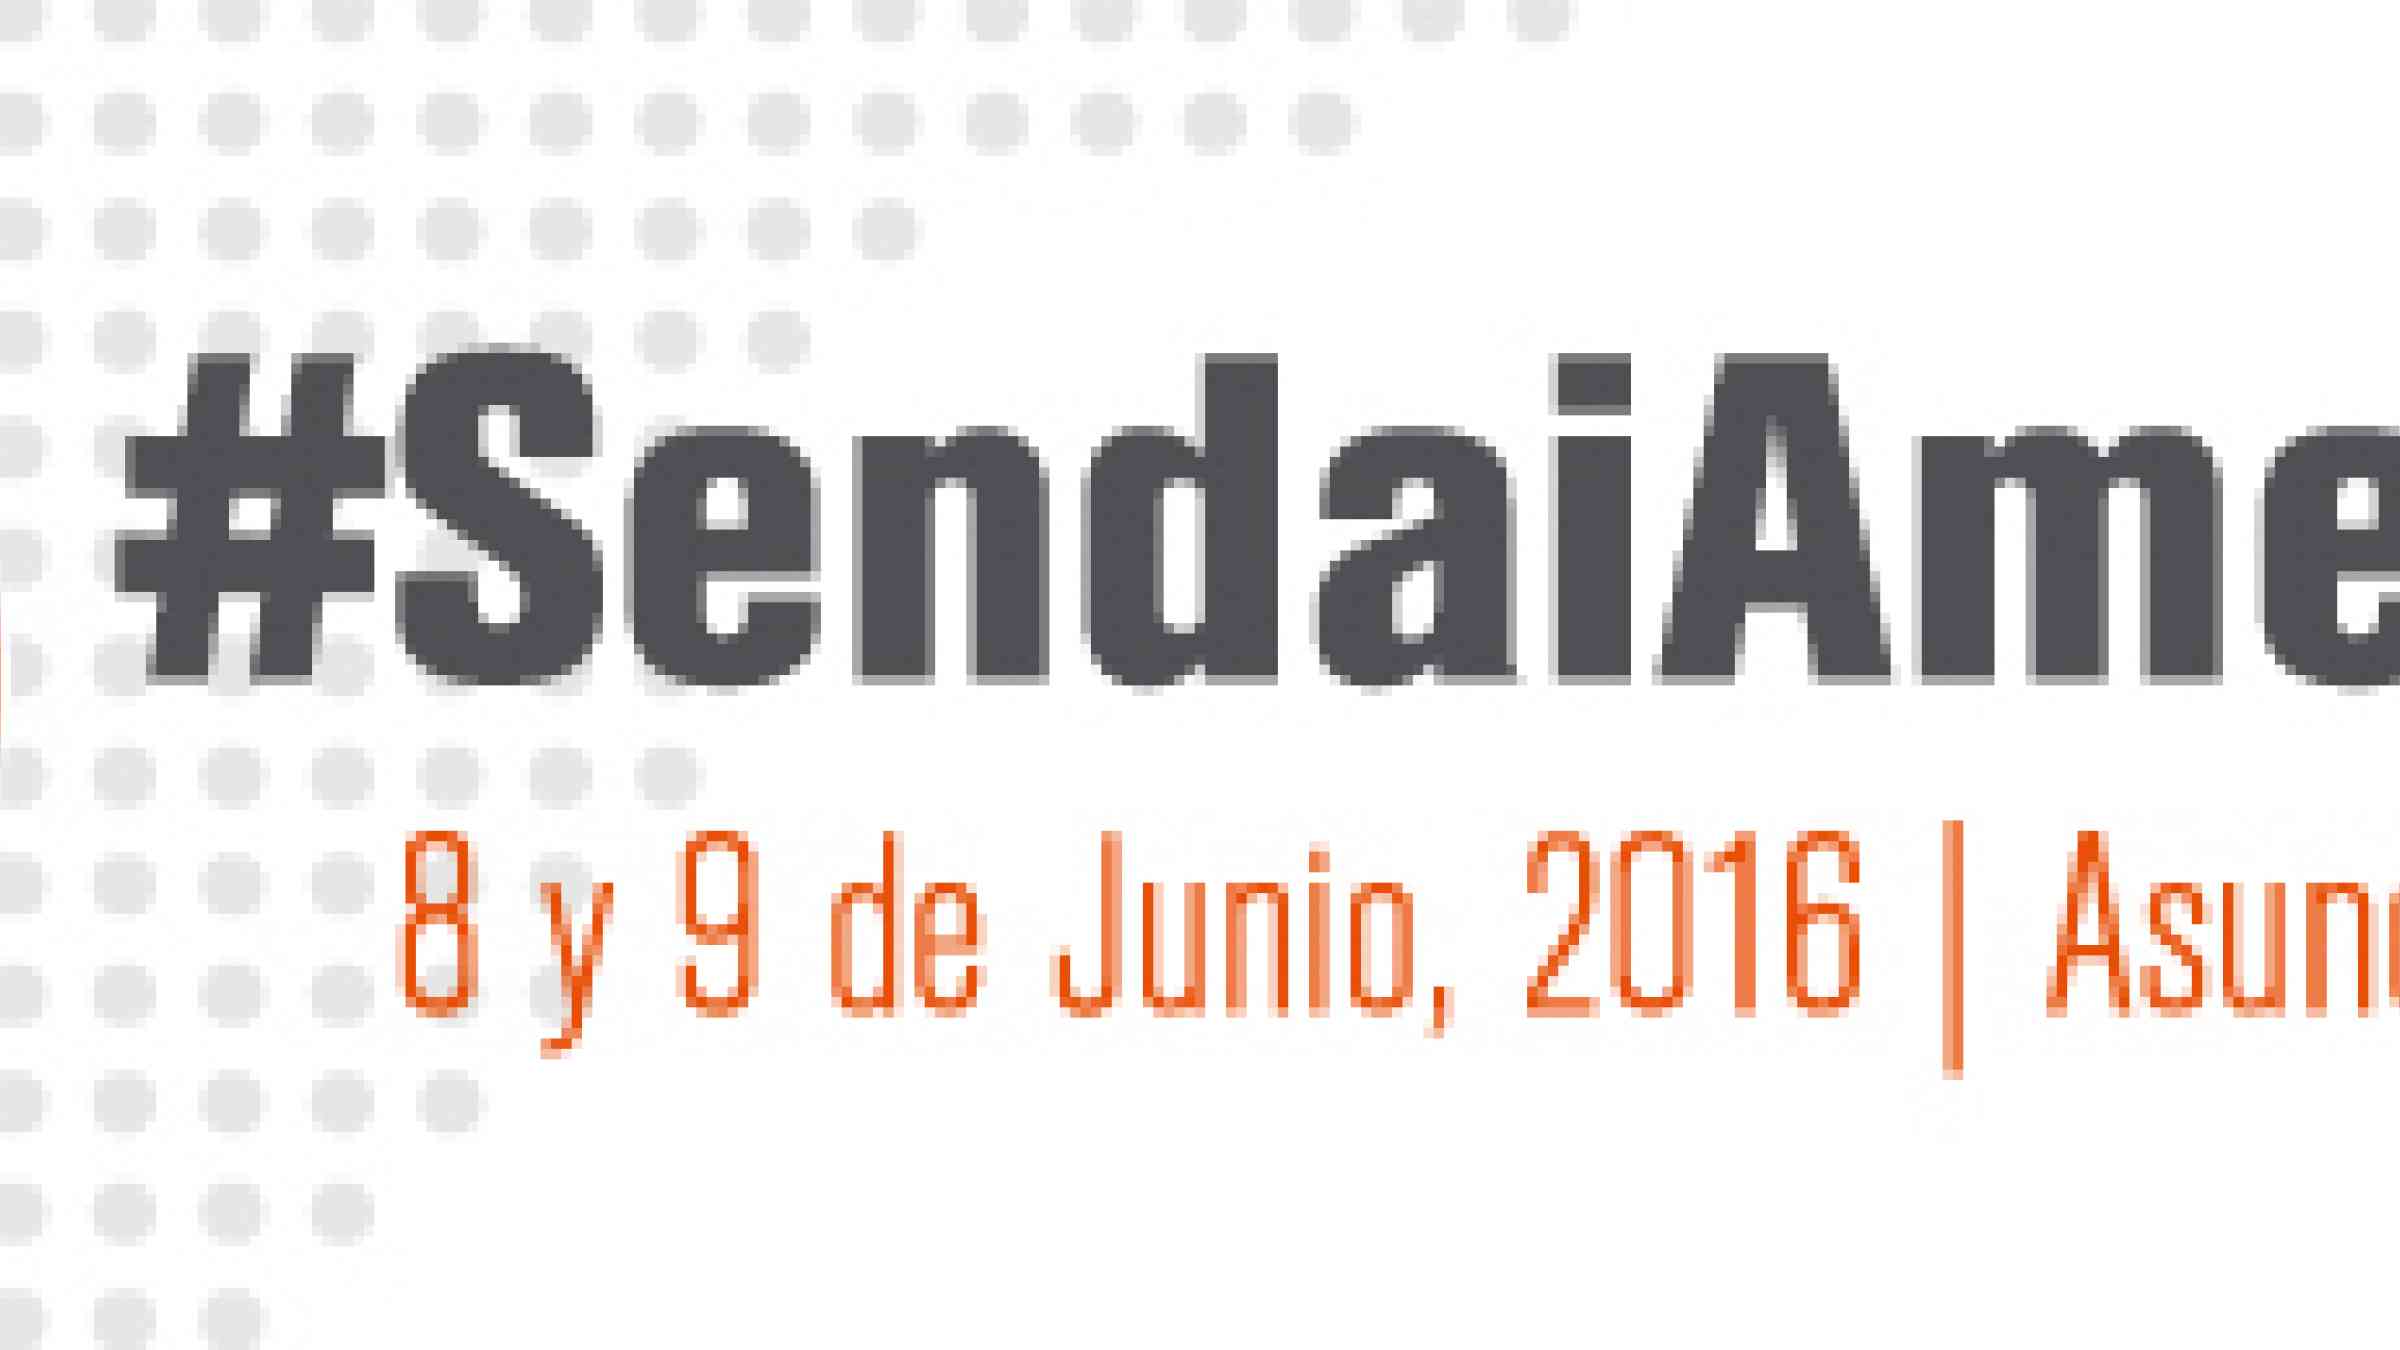 A high-level meeting on implementation of the Sendai Framework opens tomorrow in Asunción, Paraguay,